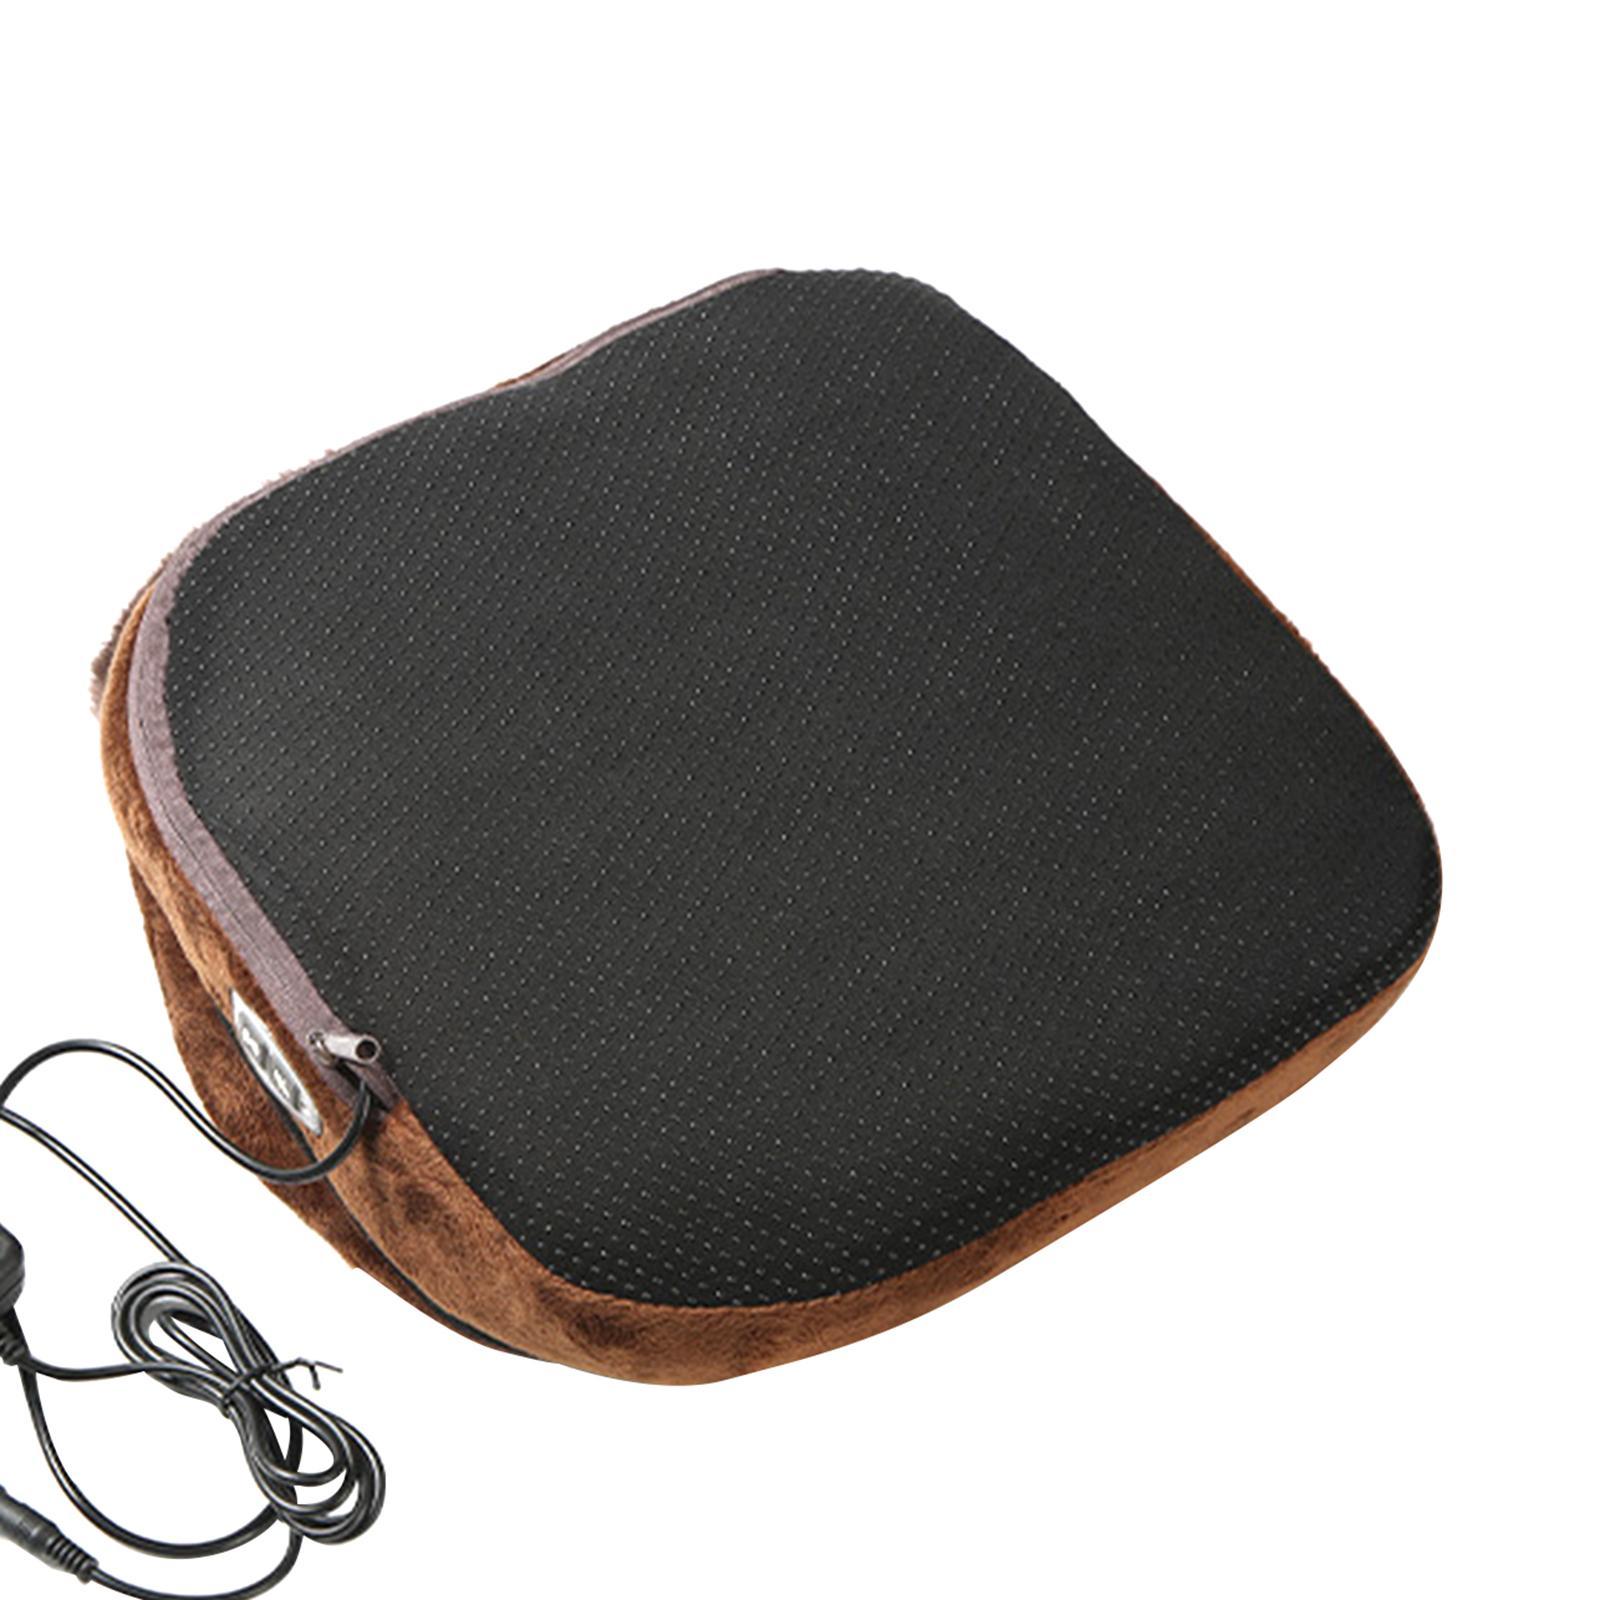 foot warmer Massager Comfortable Fatigue relieve for Under Desk Home